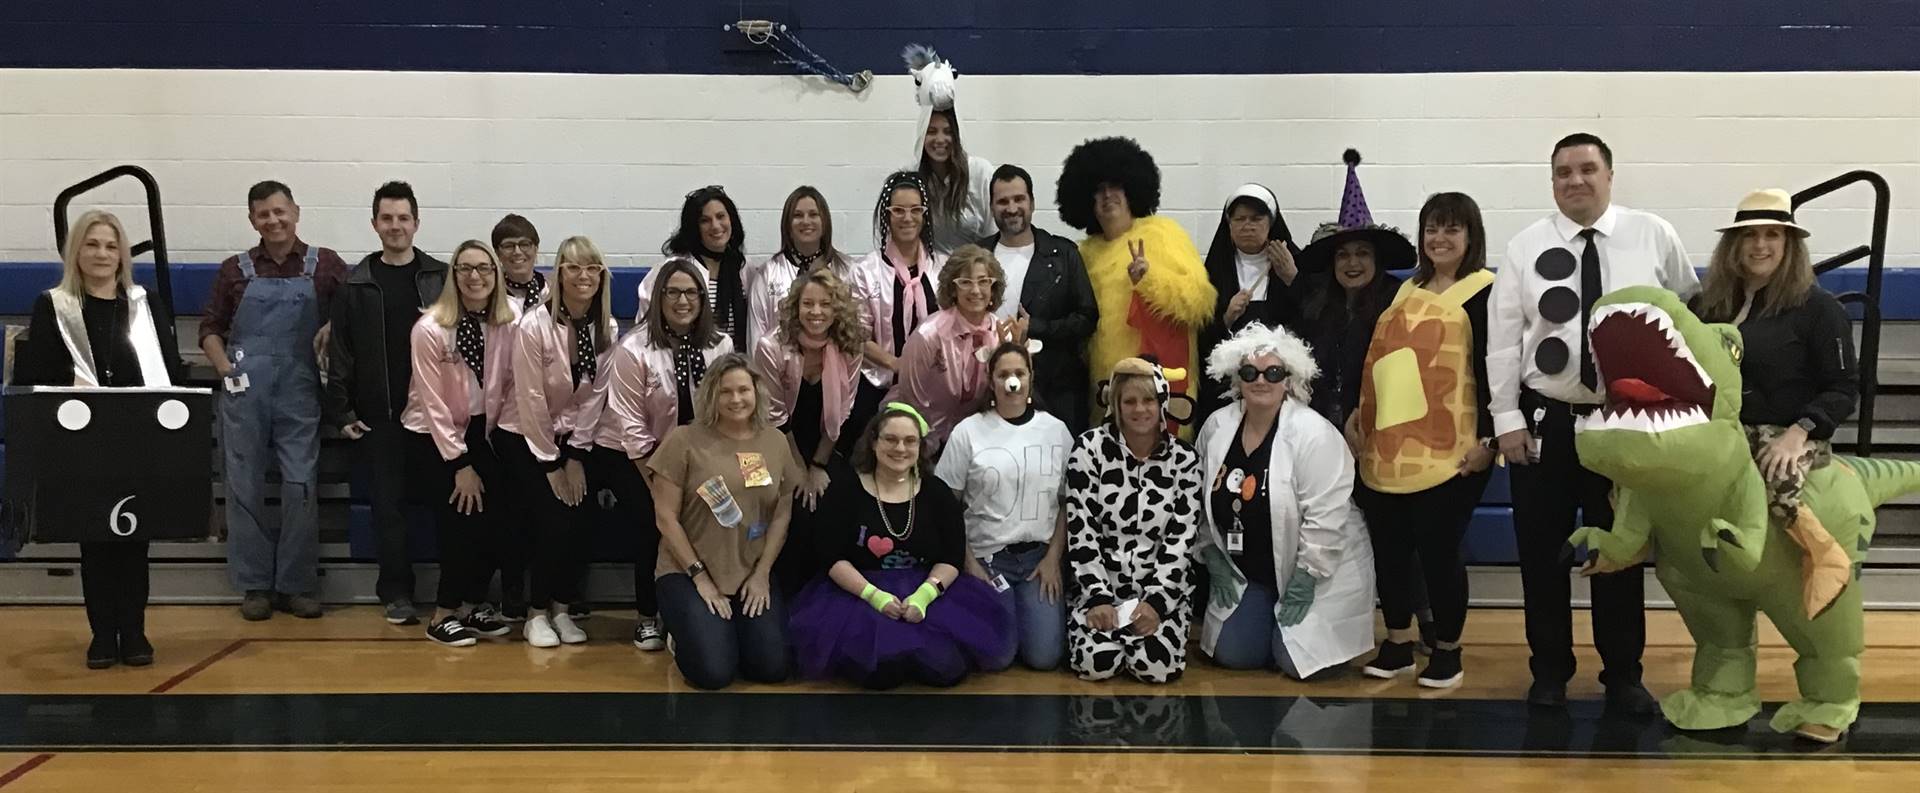 SAES staff in costumes